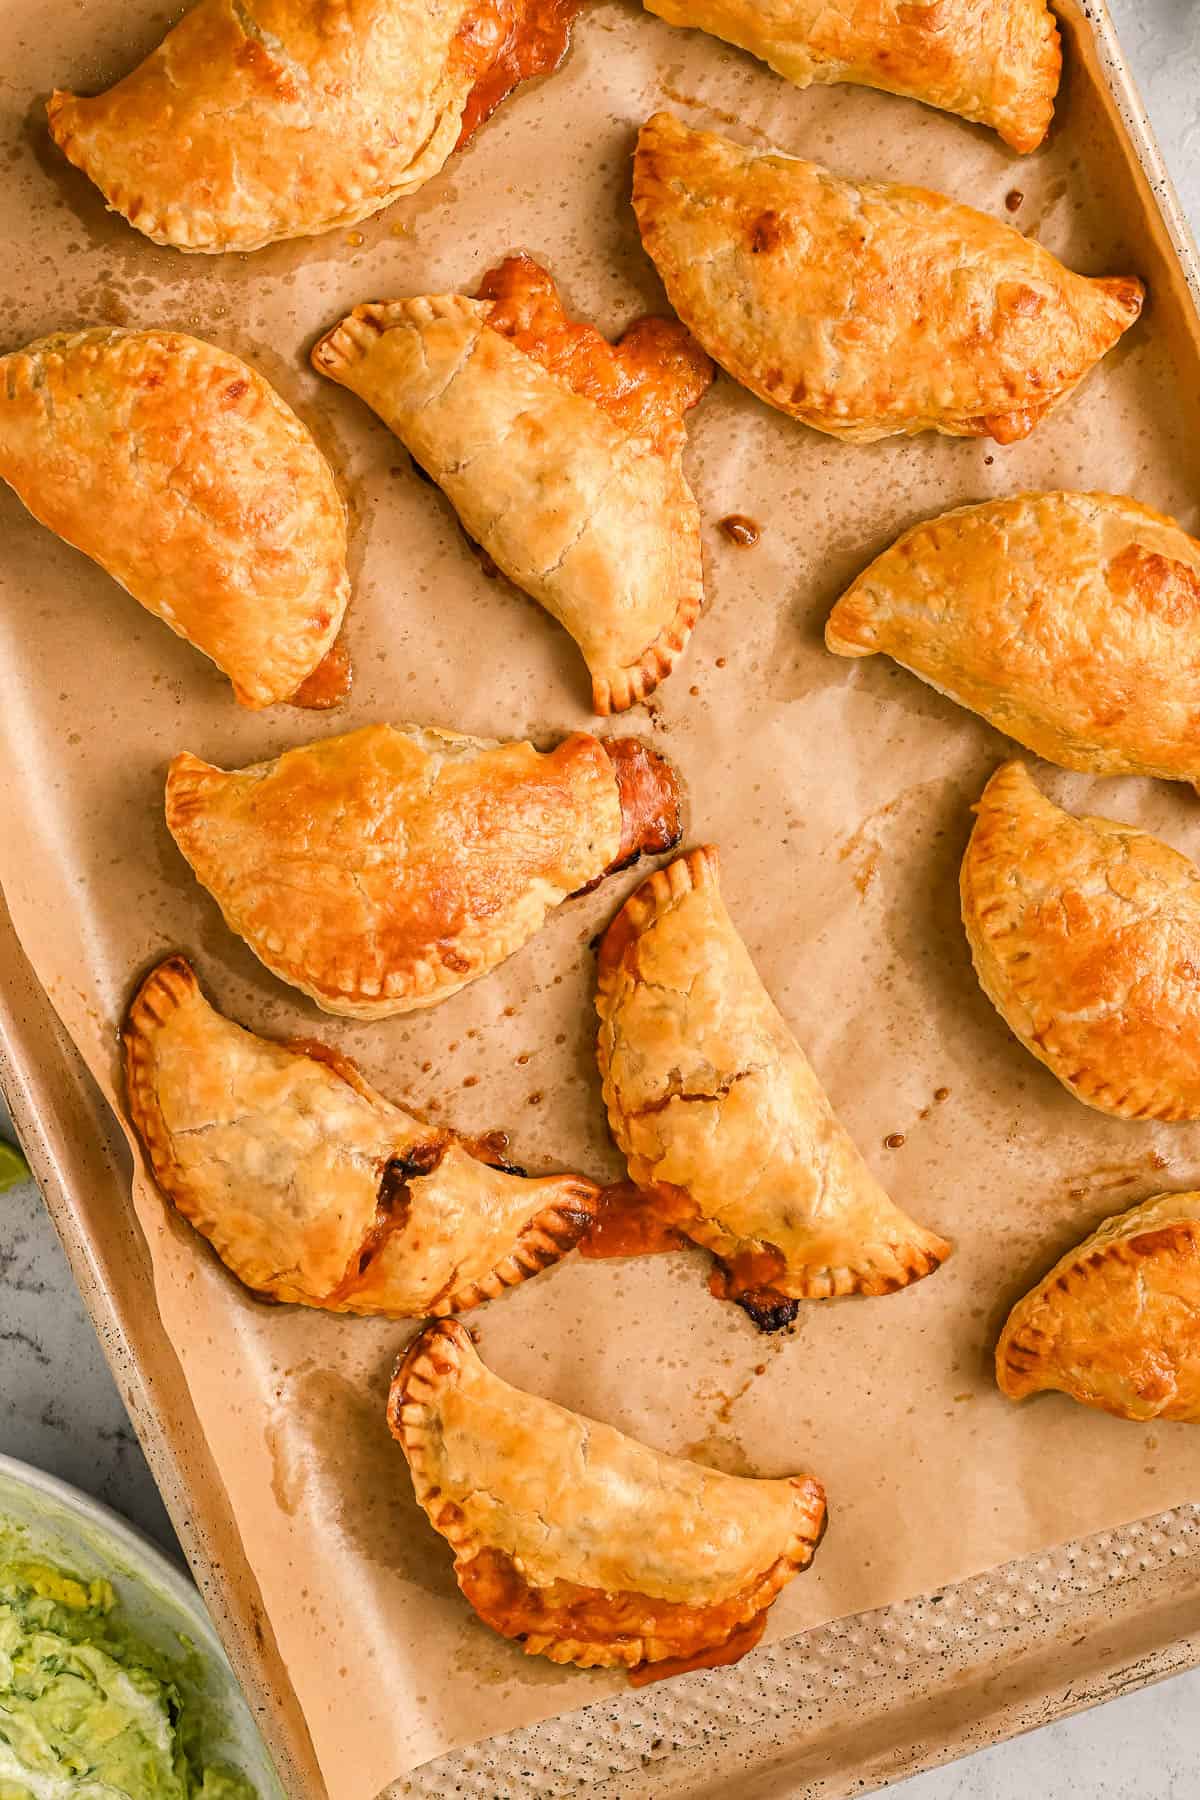 Crispy baked chicken empanadas on a parchment-lined baking sheet.